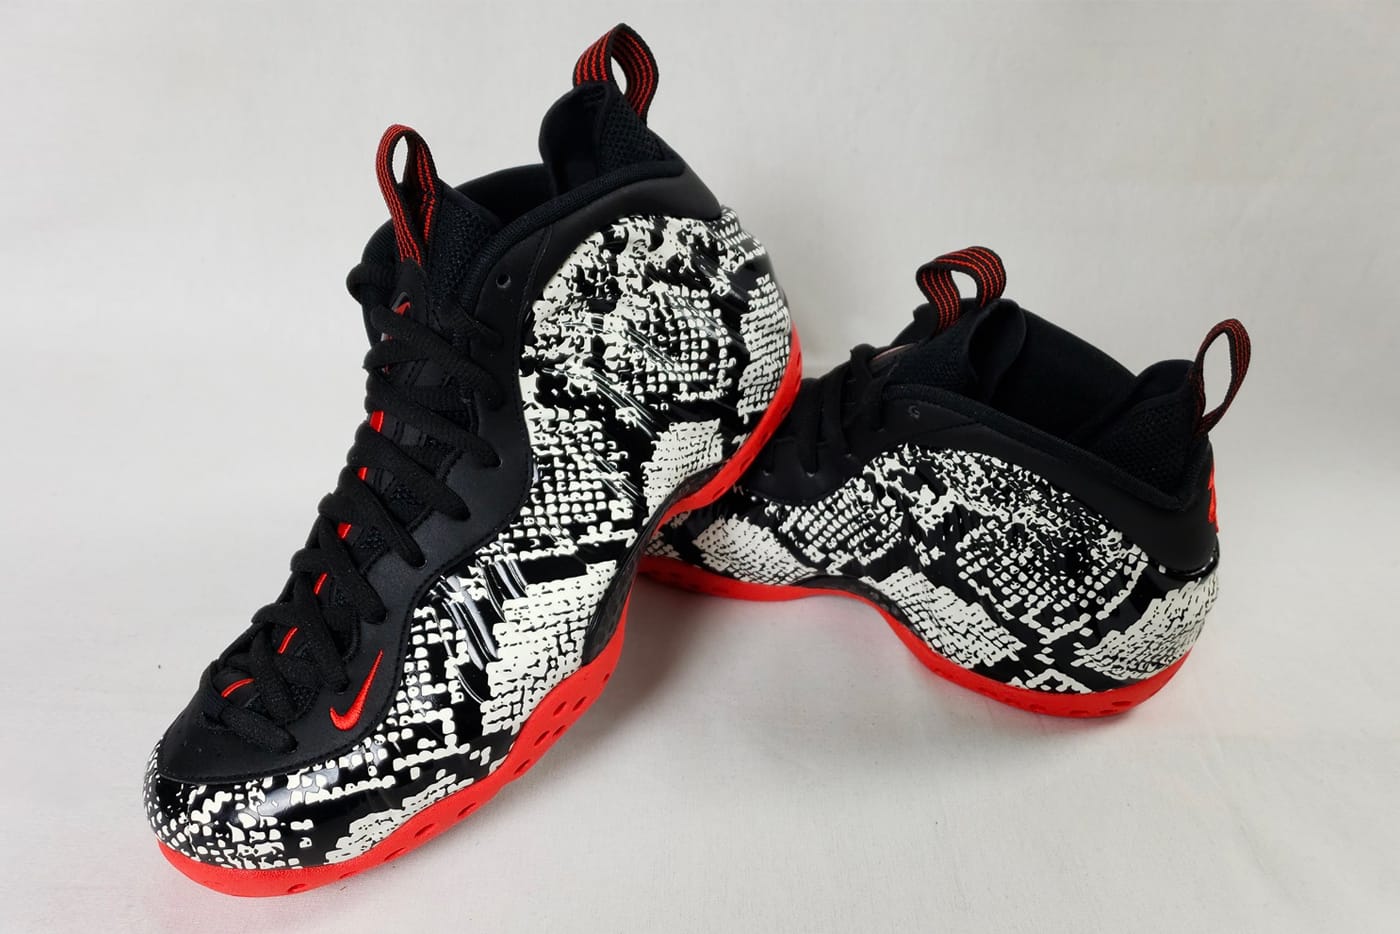 the original nike air foamposite one was inspired by what type of animal